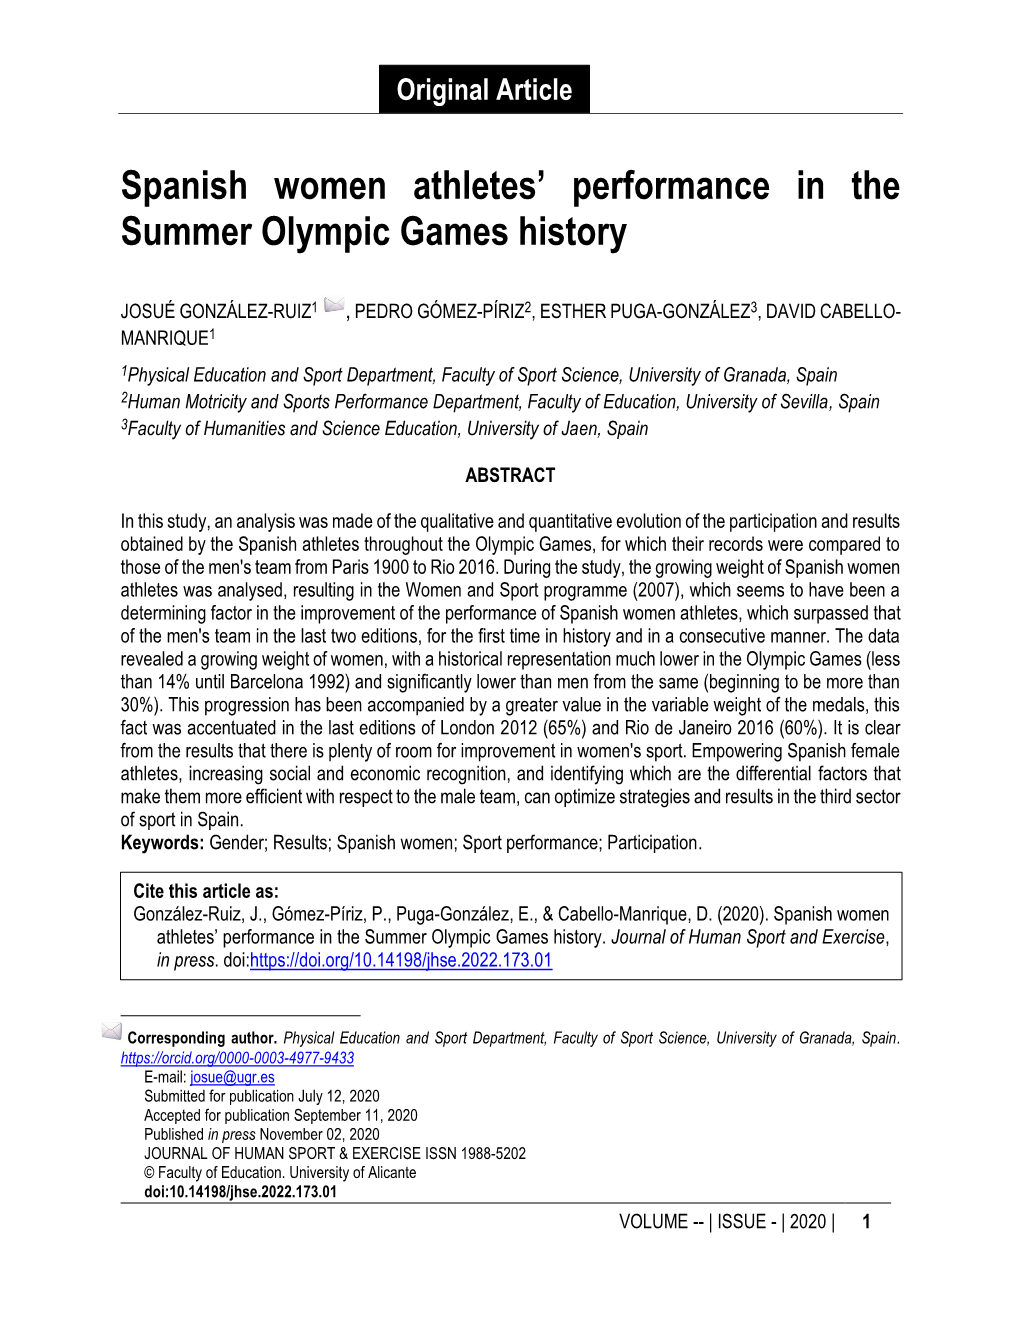 Spanish Women Athletes' Performance in the Summer Olympic Games History